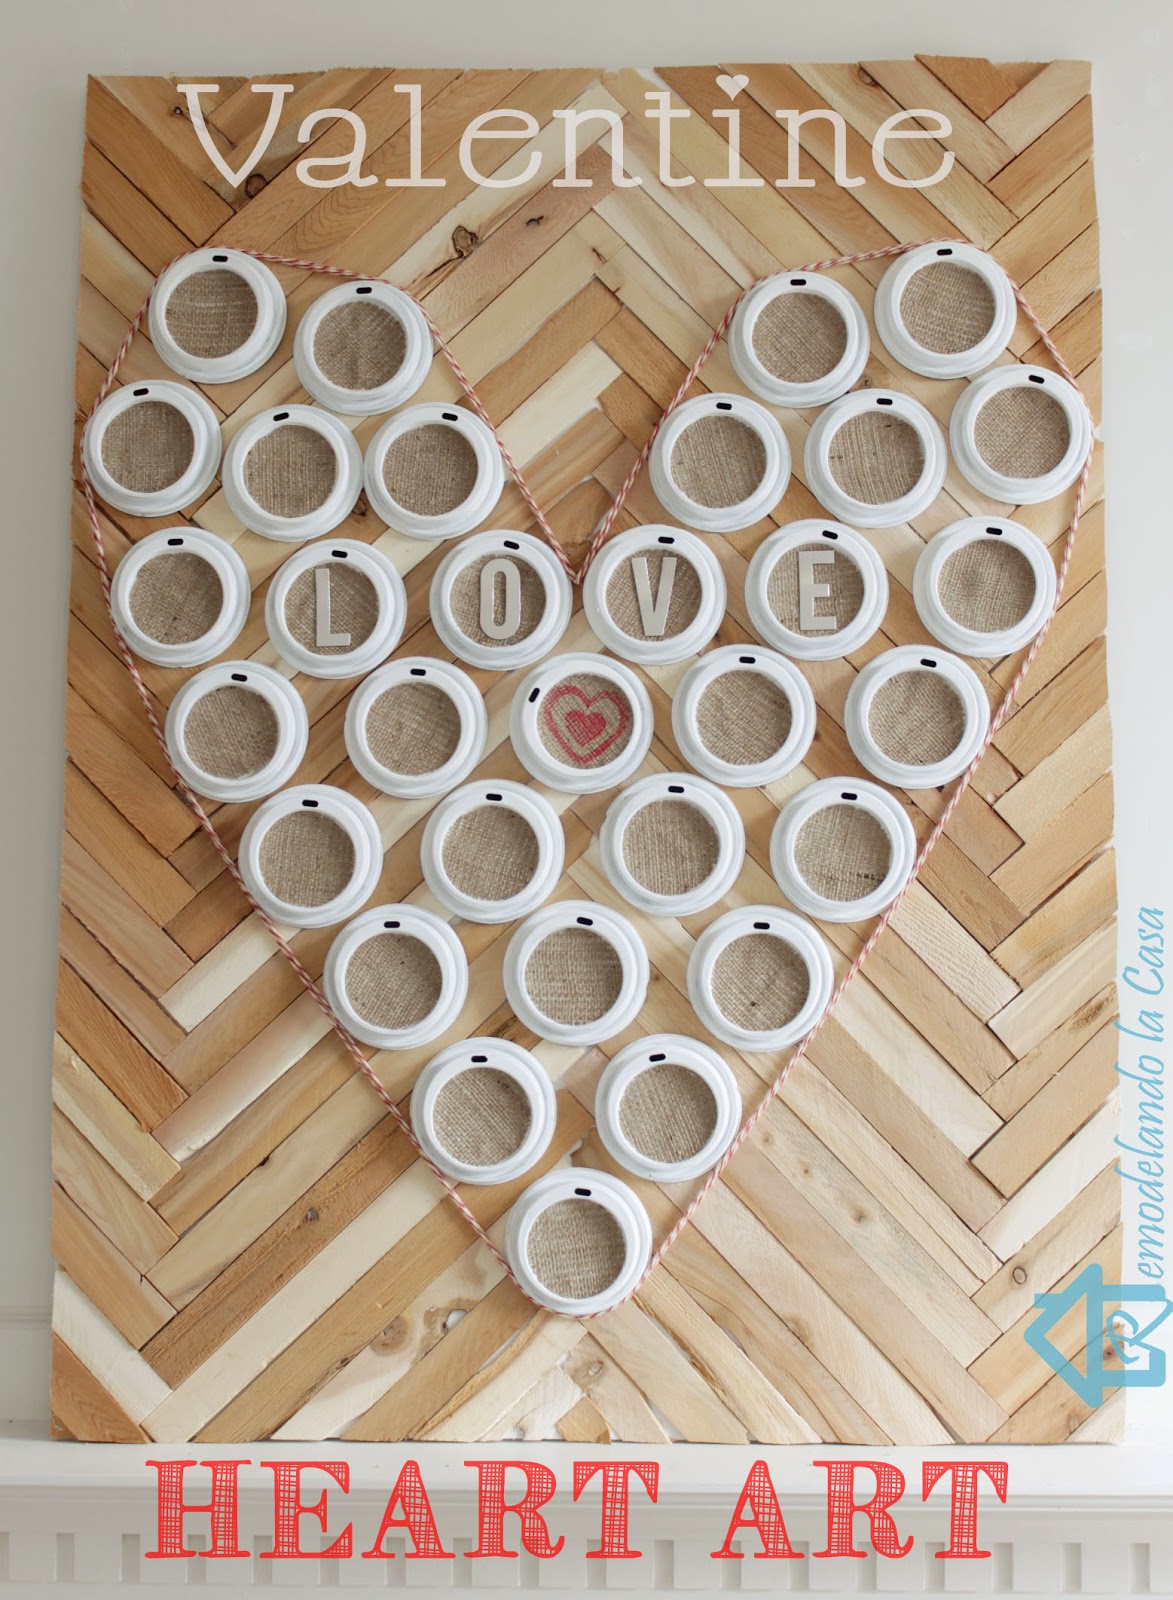 15 Fab DIY Valentine's Decor Projects That Will Help You Create A Lovely Mood